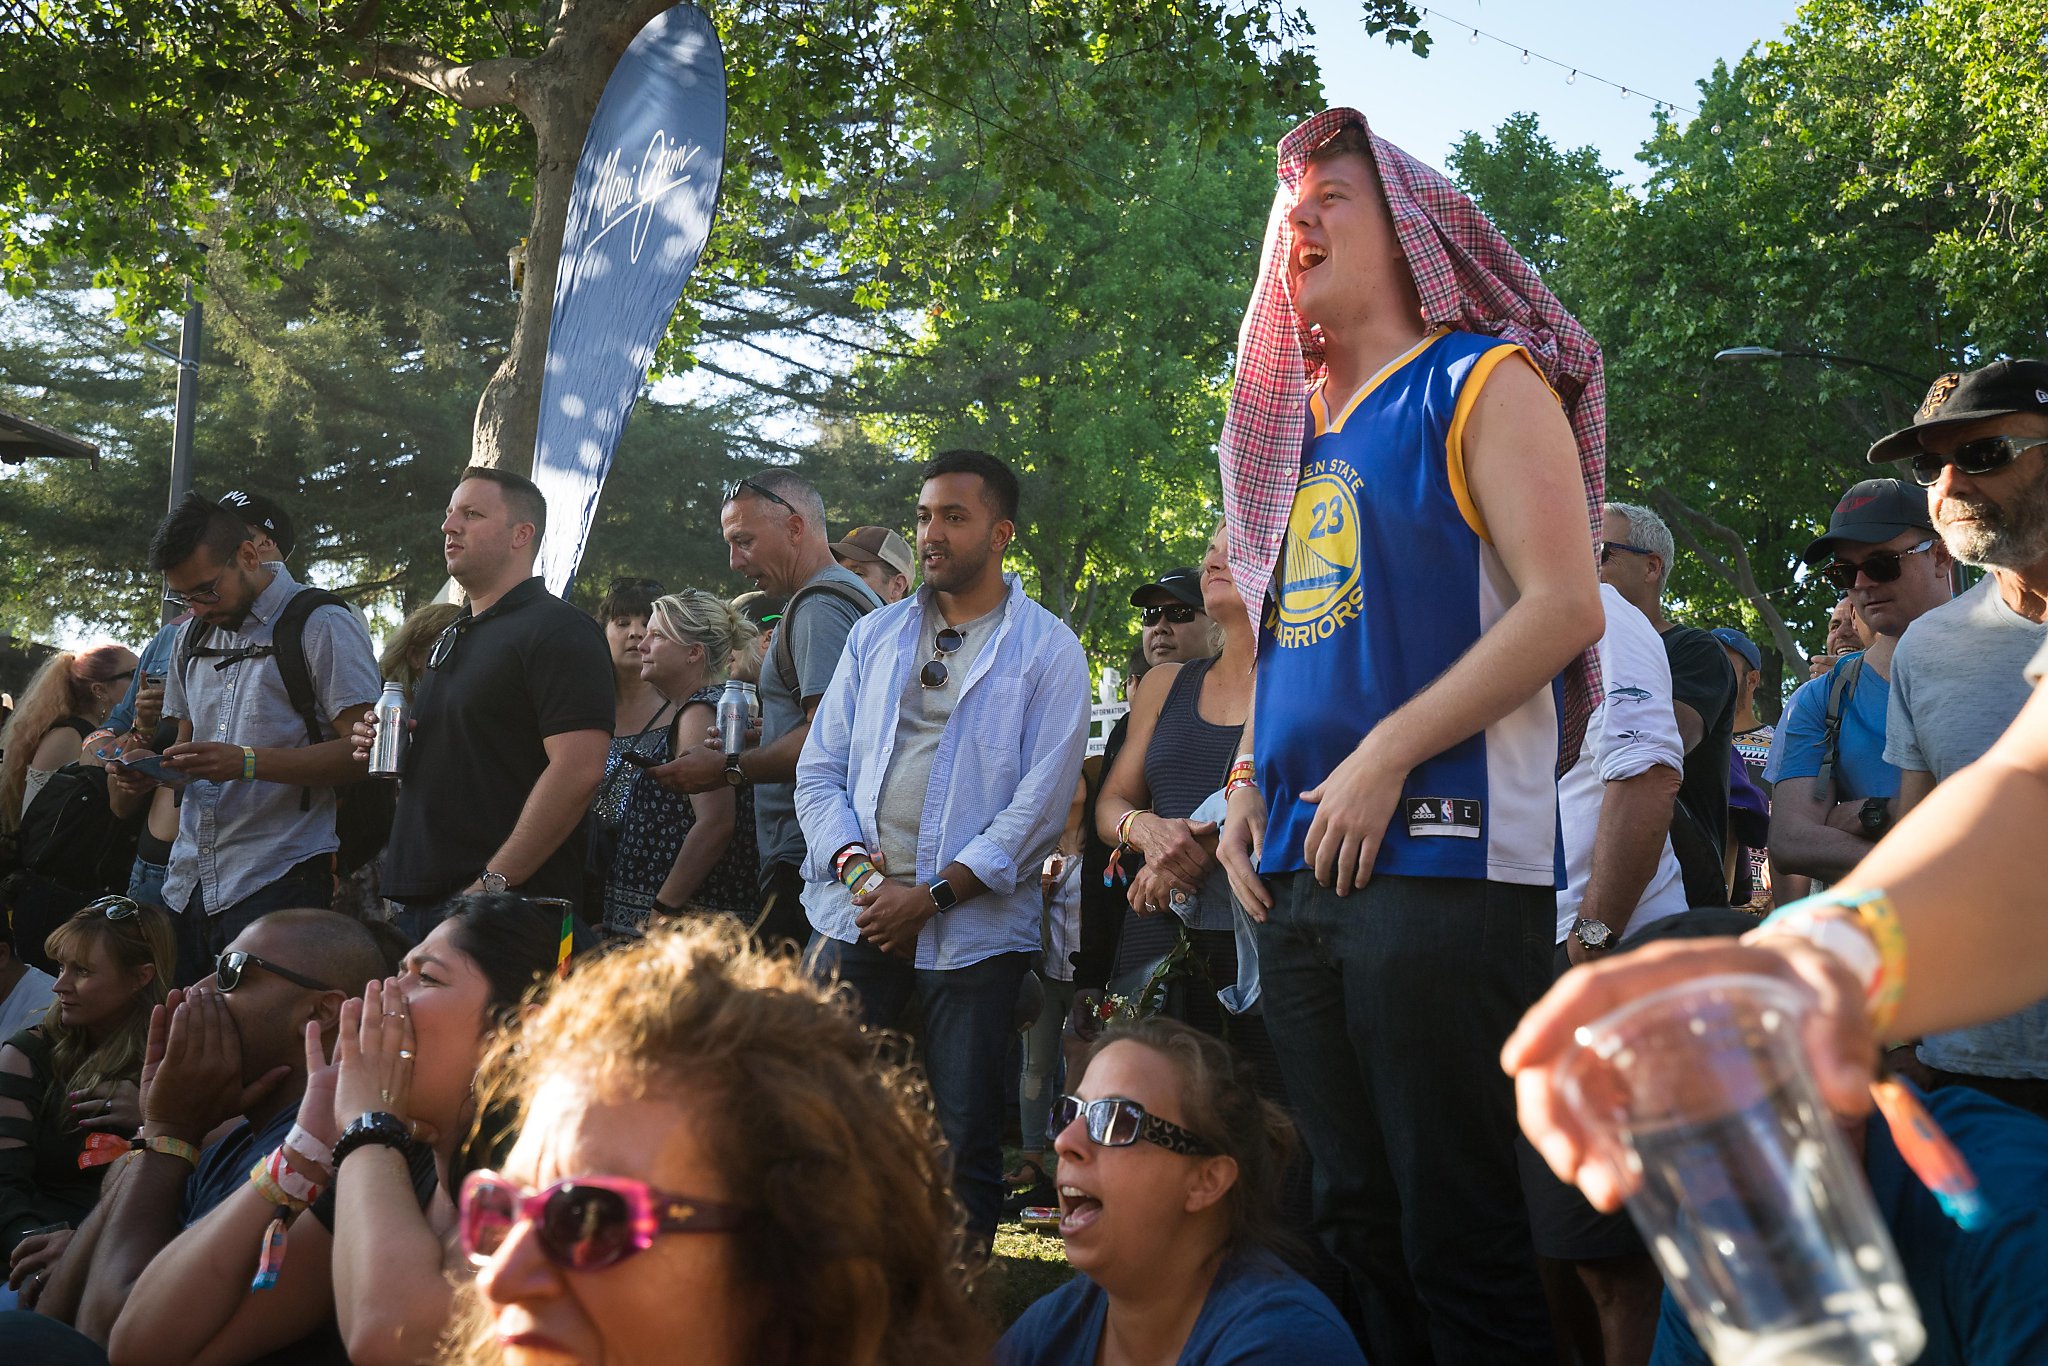 8. "Bottlerock 2018: How to Achieve the Perfect Blue Hair Color" - wide 5